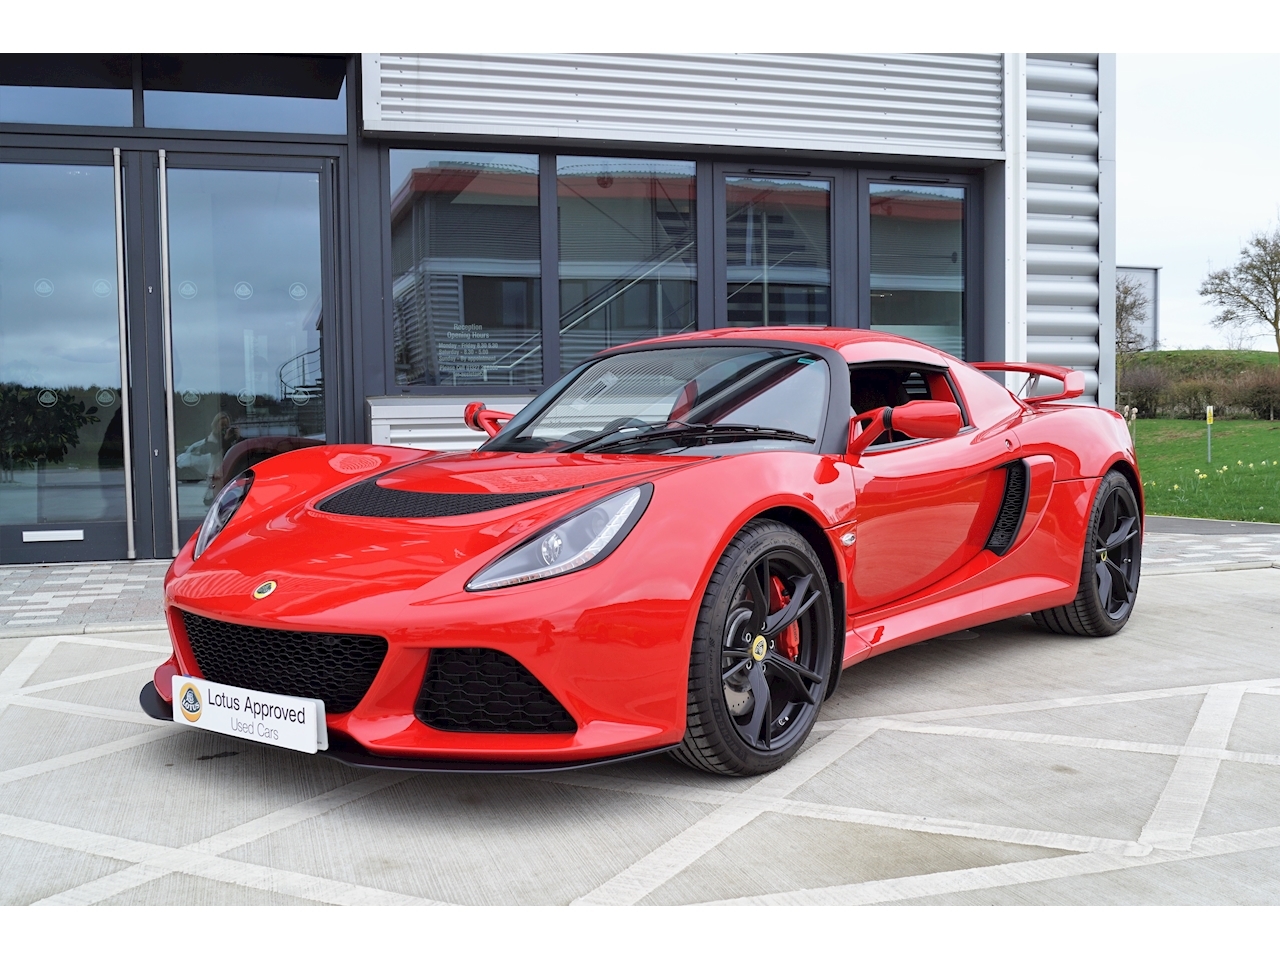 Lotus Silverstone offers paint protection that “makes a difference”